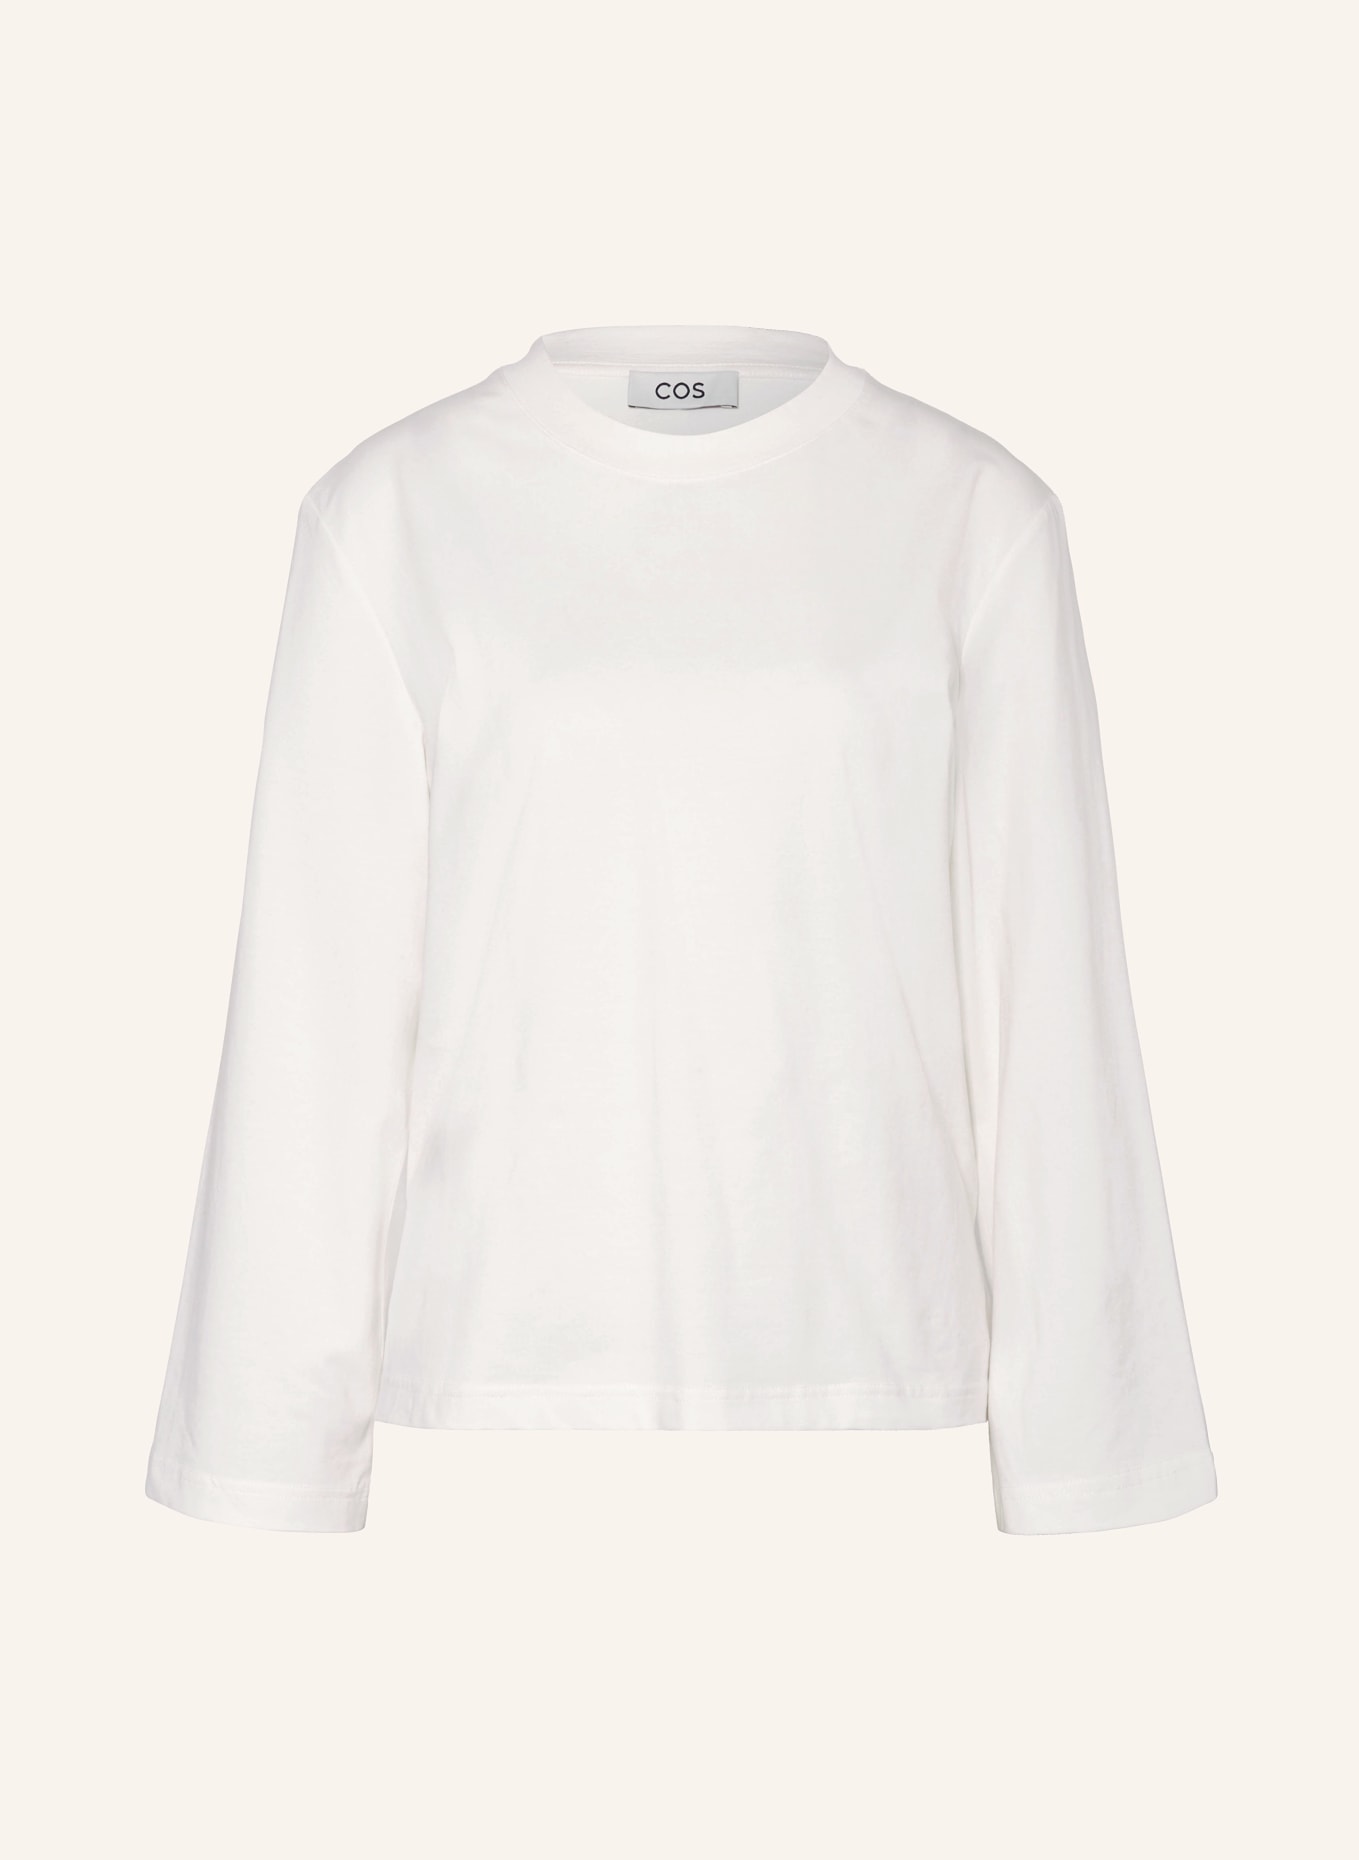 COS Long sleeve shirt, Color: WHITE (Image 1)